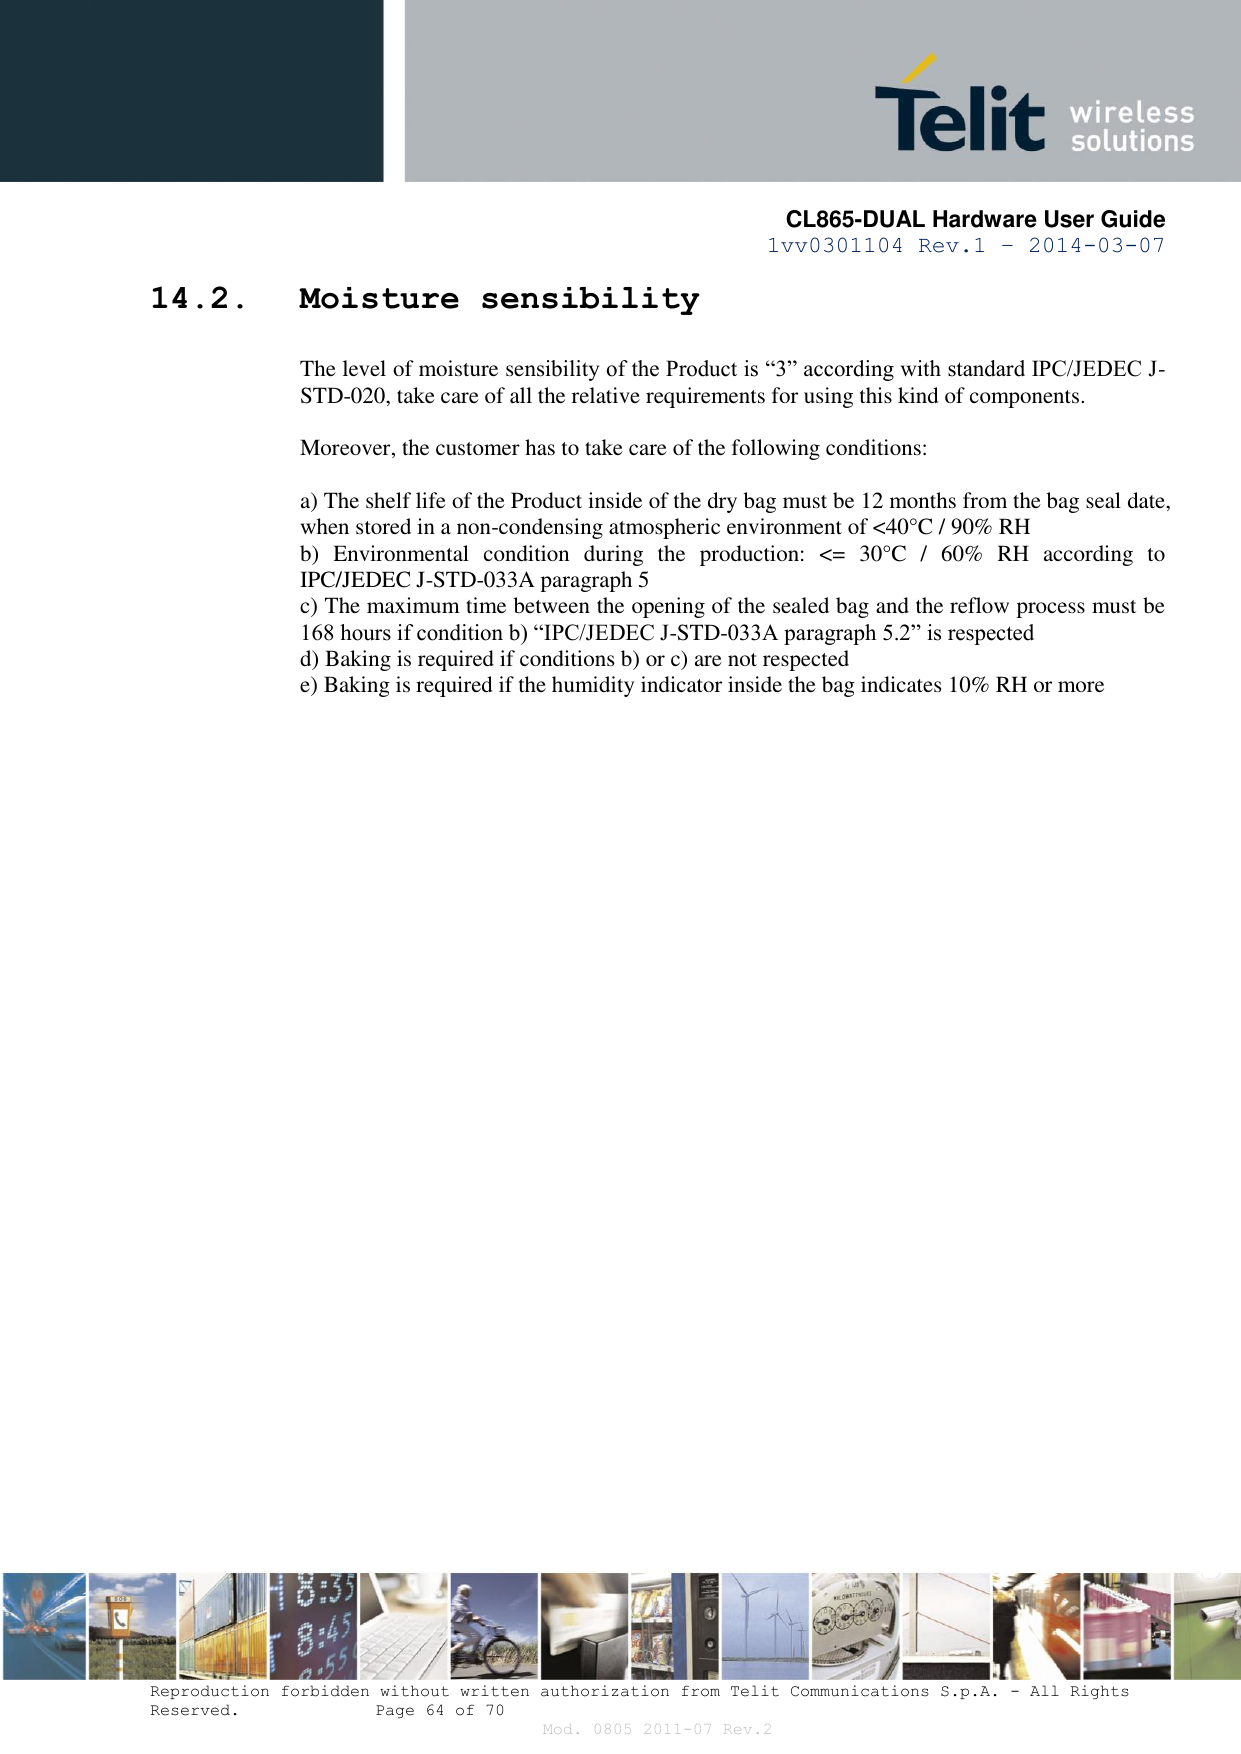       CL865-DUAL Hardware User Guide 1vv0301104 Rev.1 – 2014-03-07  Reproduction forbidden without written authorization from Telit Communications S.p.A. - All Rights Reserved.    Page 64 of 70 Mod. 0805 2011-07 Rev.2 14.2. Moisture sensibility The level of moisture sensibility of the Product is “3” according with standard IPC/JEDEC J-STD-020, take care of all the relative requirements for using this kind of components.  Moreover, the customer has to take care of the following conditions:  a) The shelf life of the Product inside of the dry bag must be 12 months from the bag seal date, when stored in a non-condensing atmospheric environment of &lt;40°C / 90% RH b)  Environmental  condition  during  the  production:  &lt;=  30°C  /  60%  RH  according  to IPC/JEDEC J-STD-033A paragraph 5 c) The maximum time between the opening of the sealed bag and the reflow process must be 168 hours if condition b) “IPC/JEDEC J-STD-033A paragraph 5.2” is respected d) Baking is required if conditions b) or c) are not respected e) Baking is required if the humidity indicator inside the bag indicates 10% RH or more  